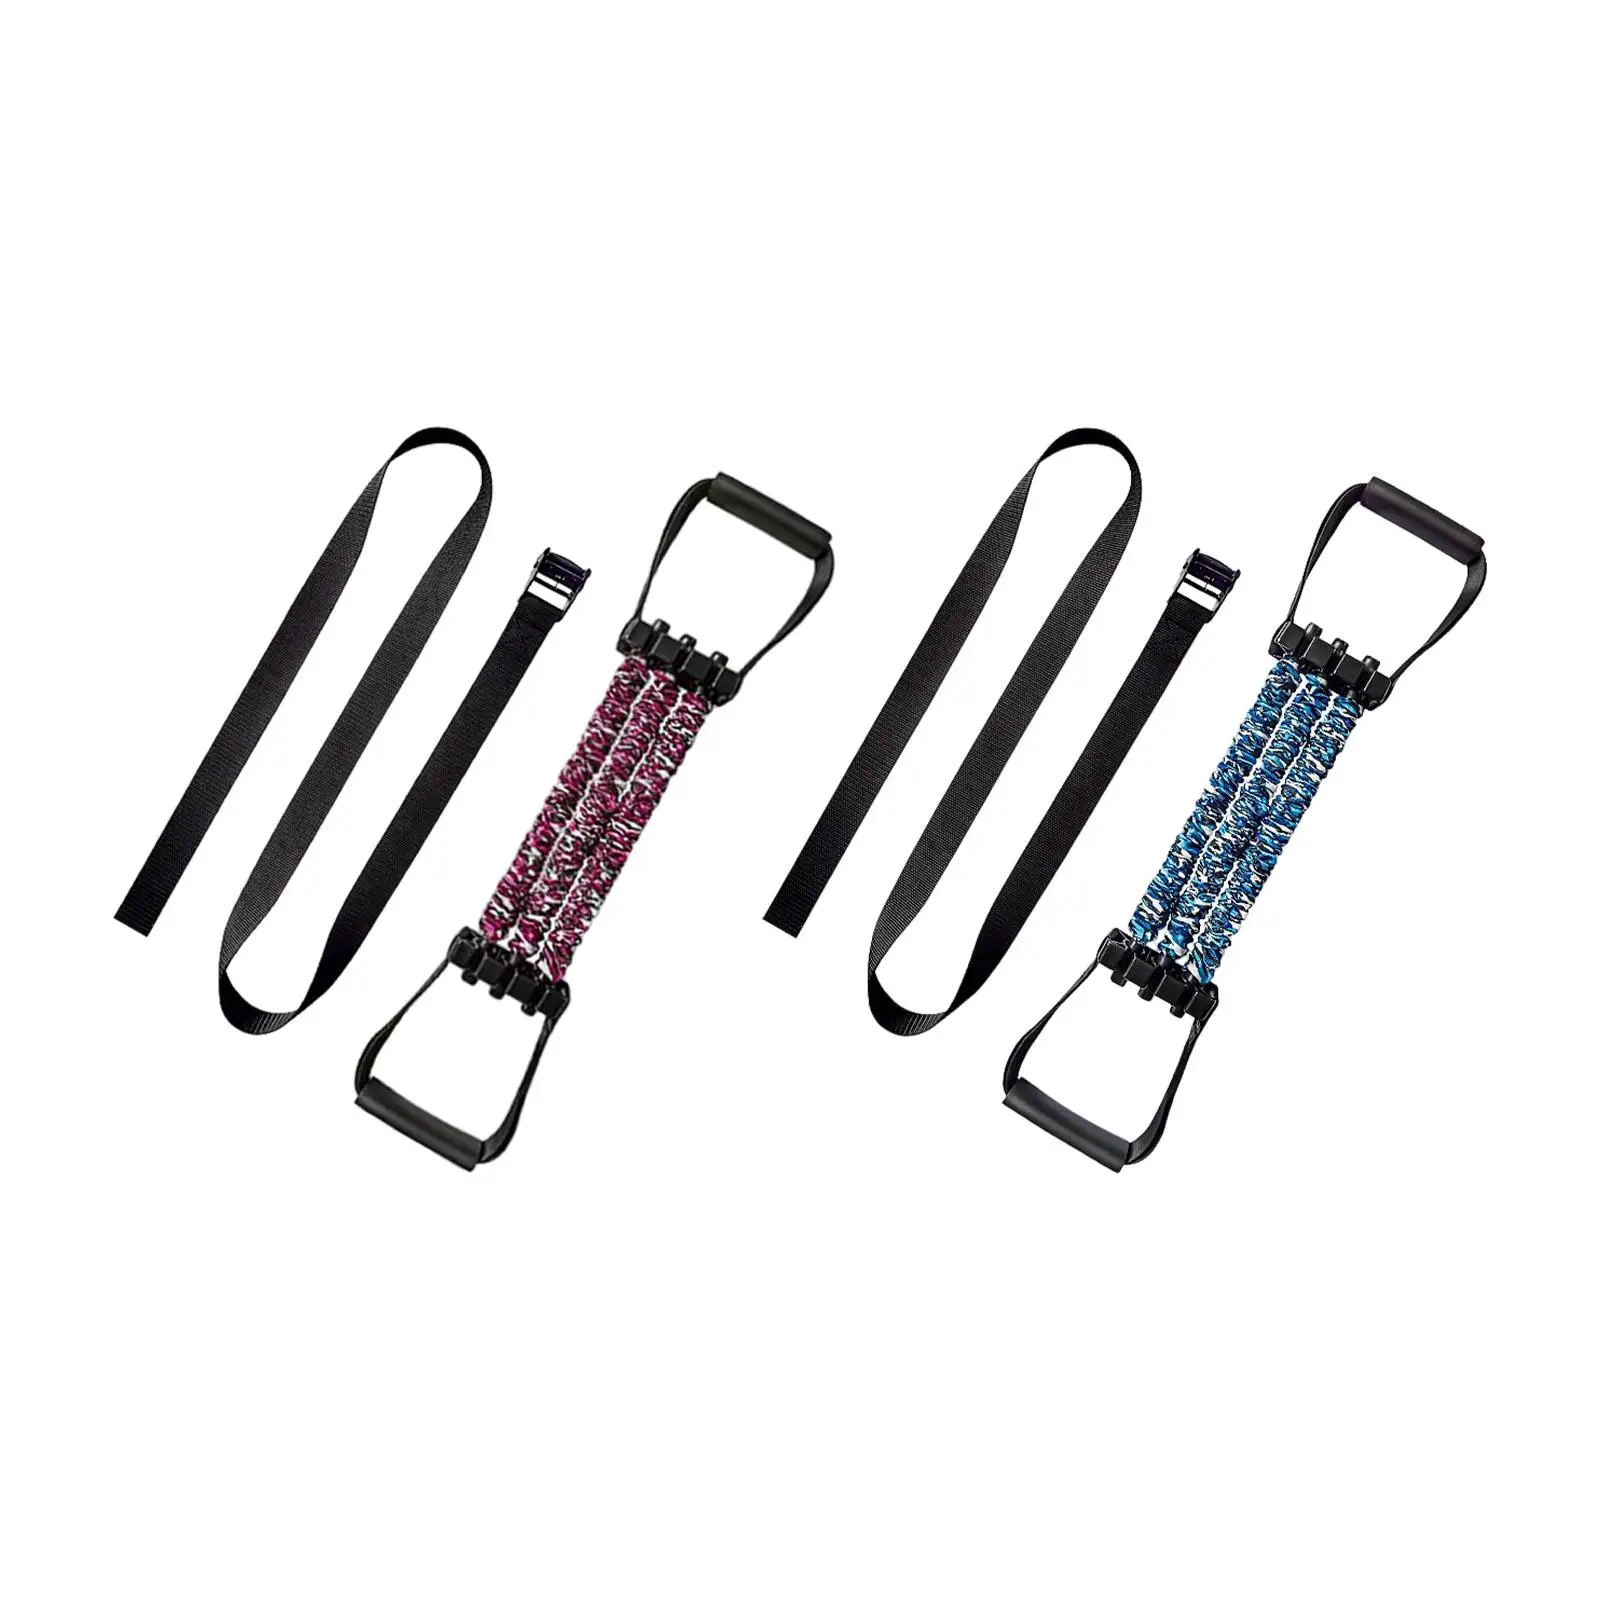 Chin up Assist Band System Chin up Adjustable Premium Heavy Duty for Fitness